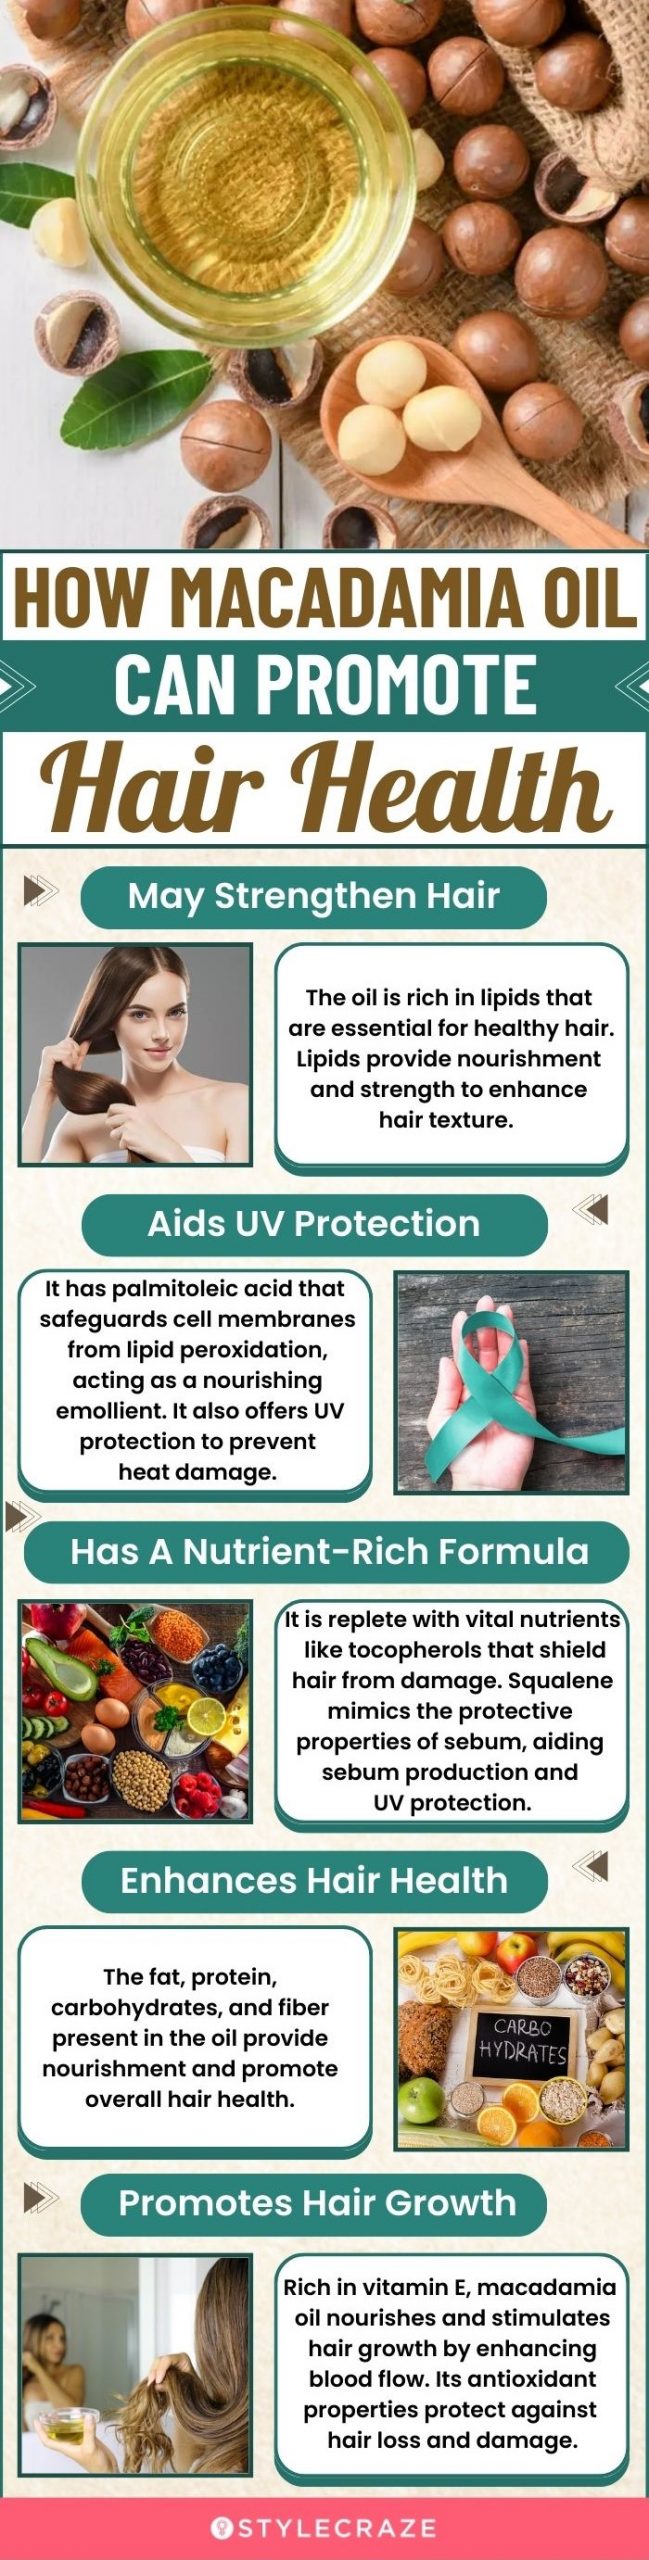 how macadamia oil can promote hair health (infographic)